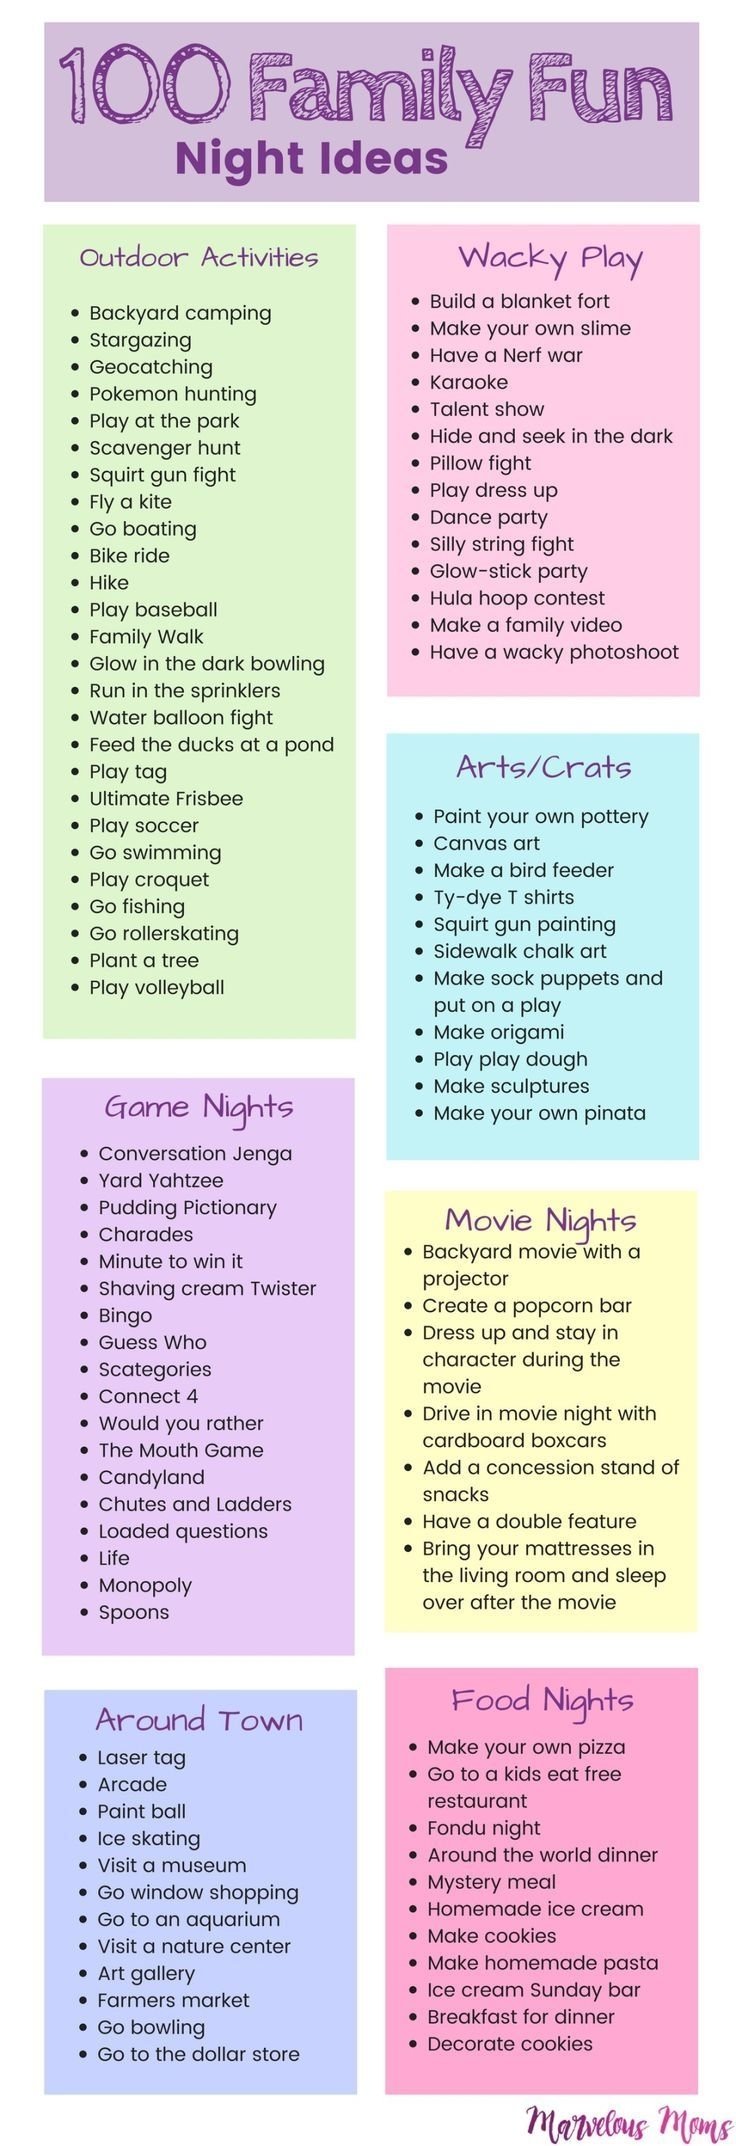 10 Famous Family Fun Night Ideas For Schools 100 family fun night ideas kids activities playing with kids 2023